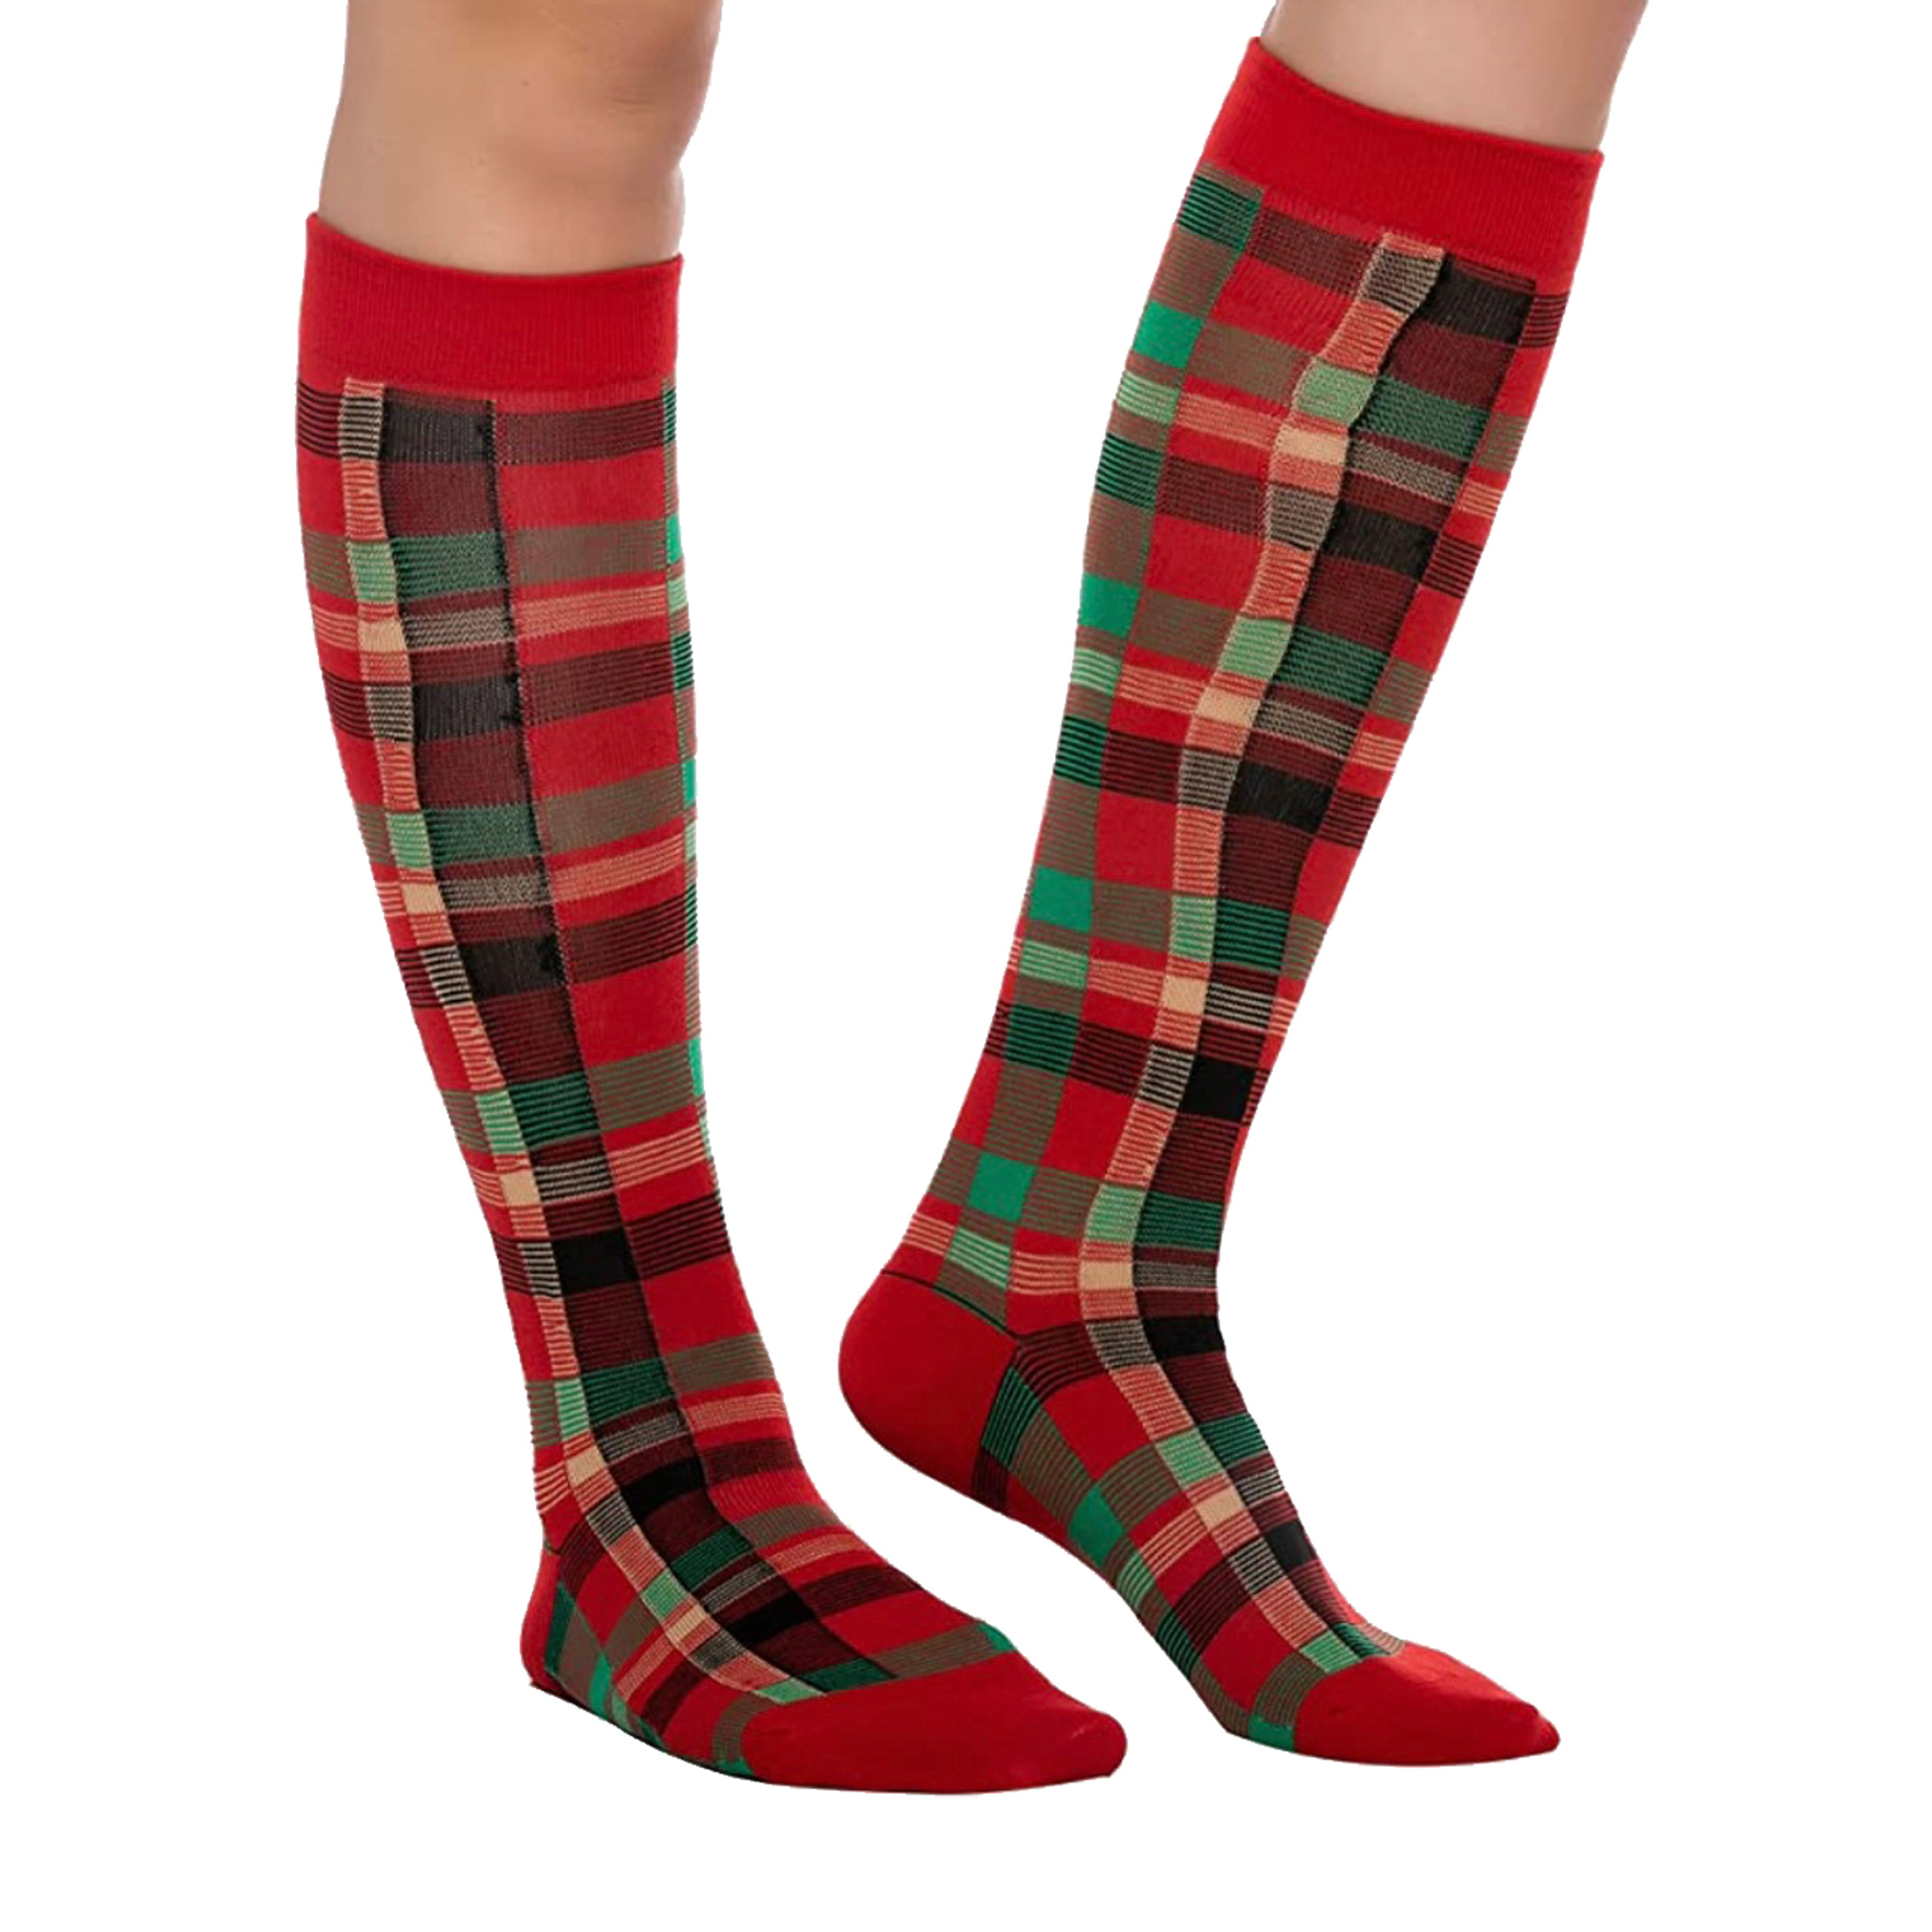 Red Knee High Socks - Made in USA